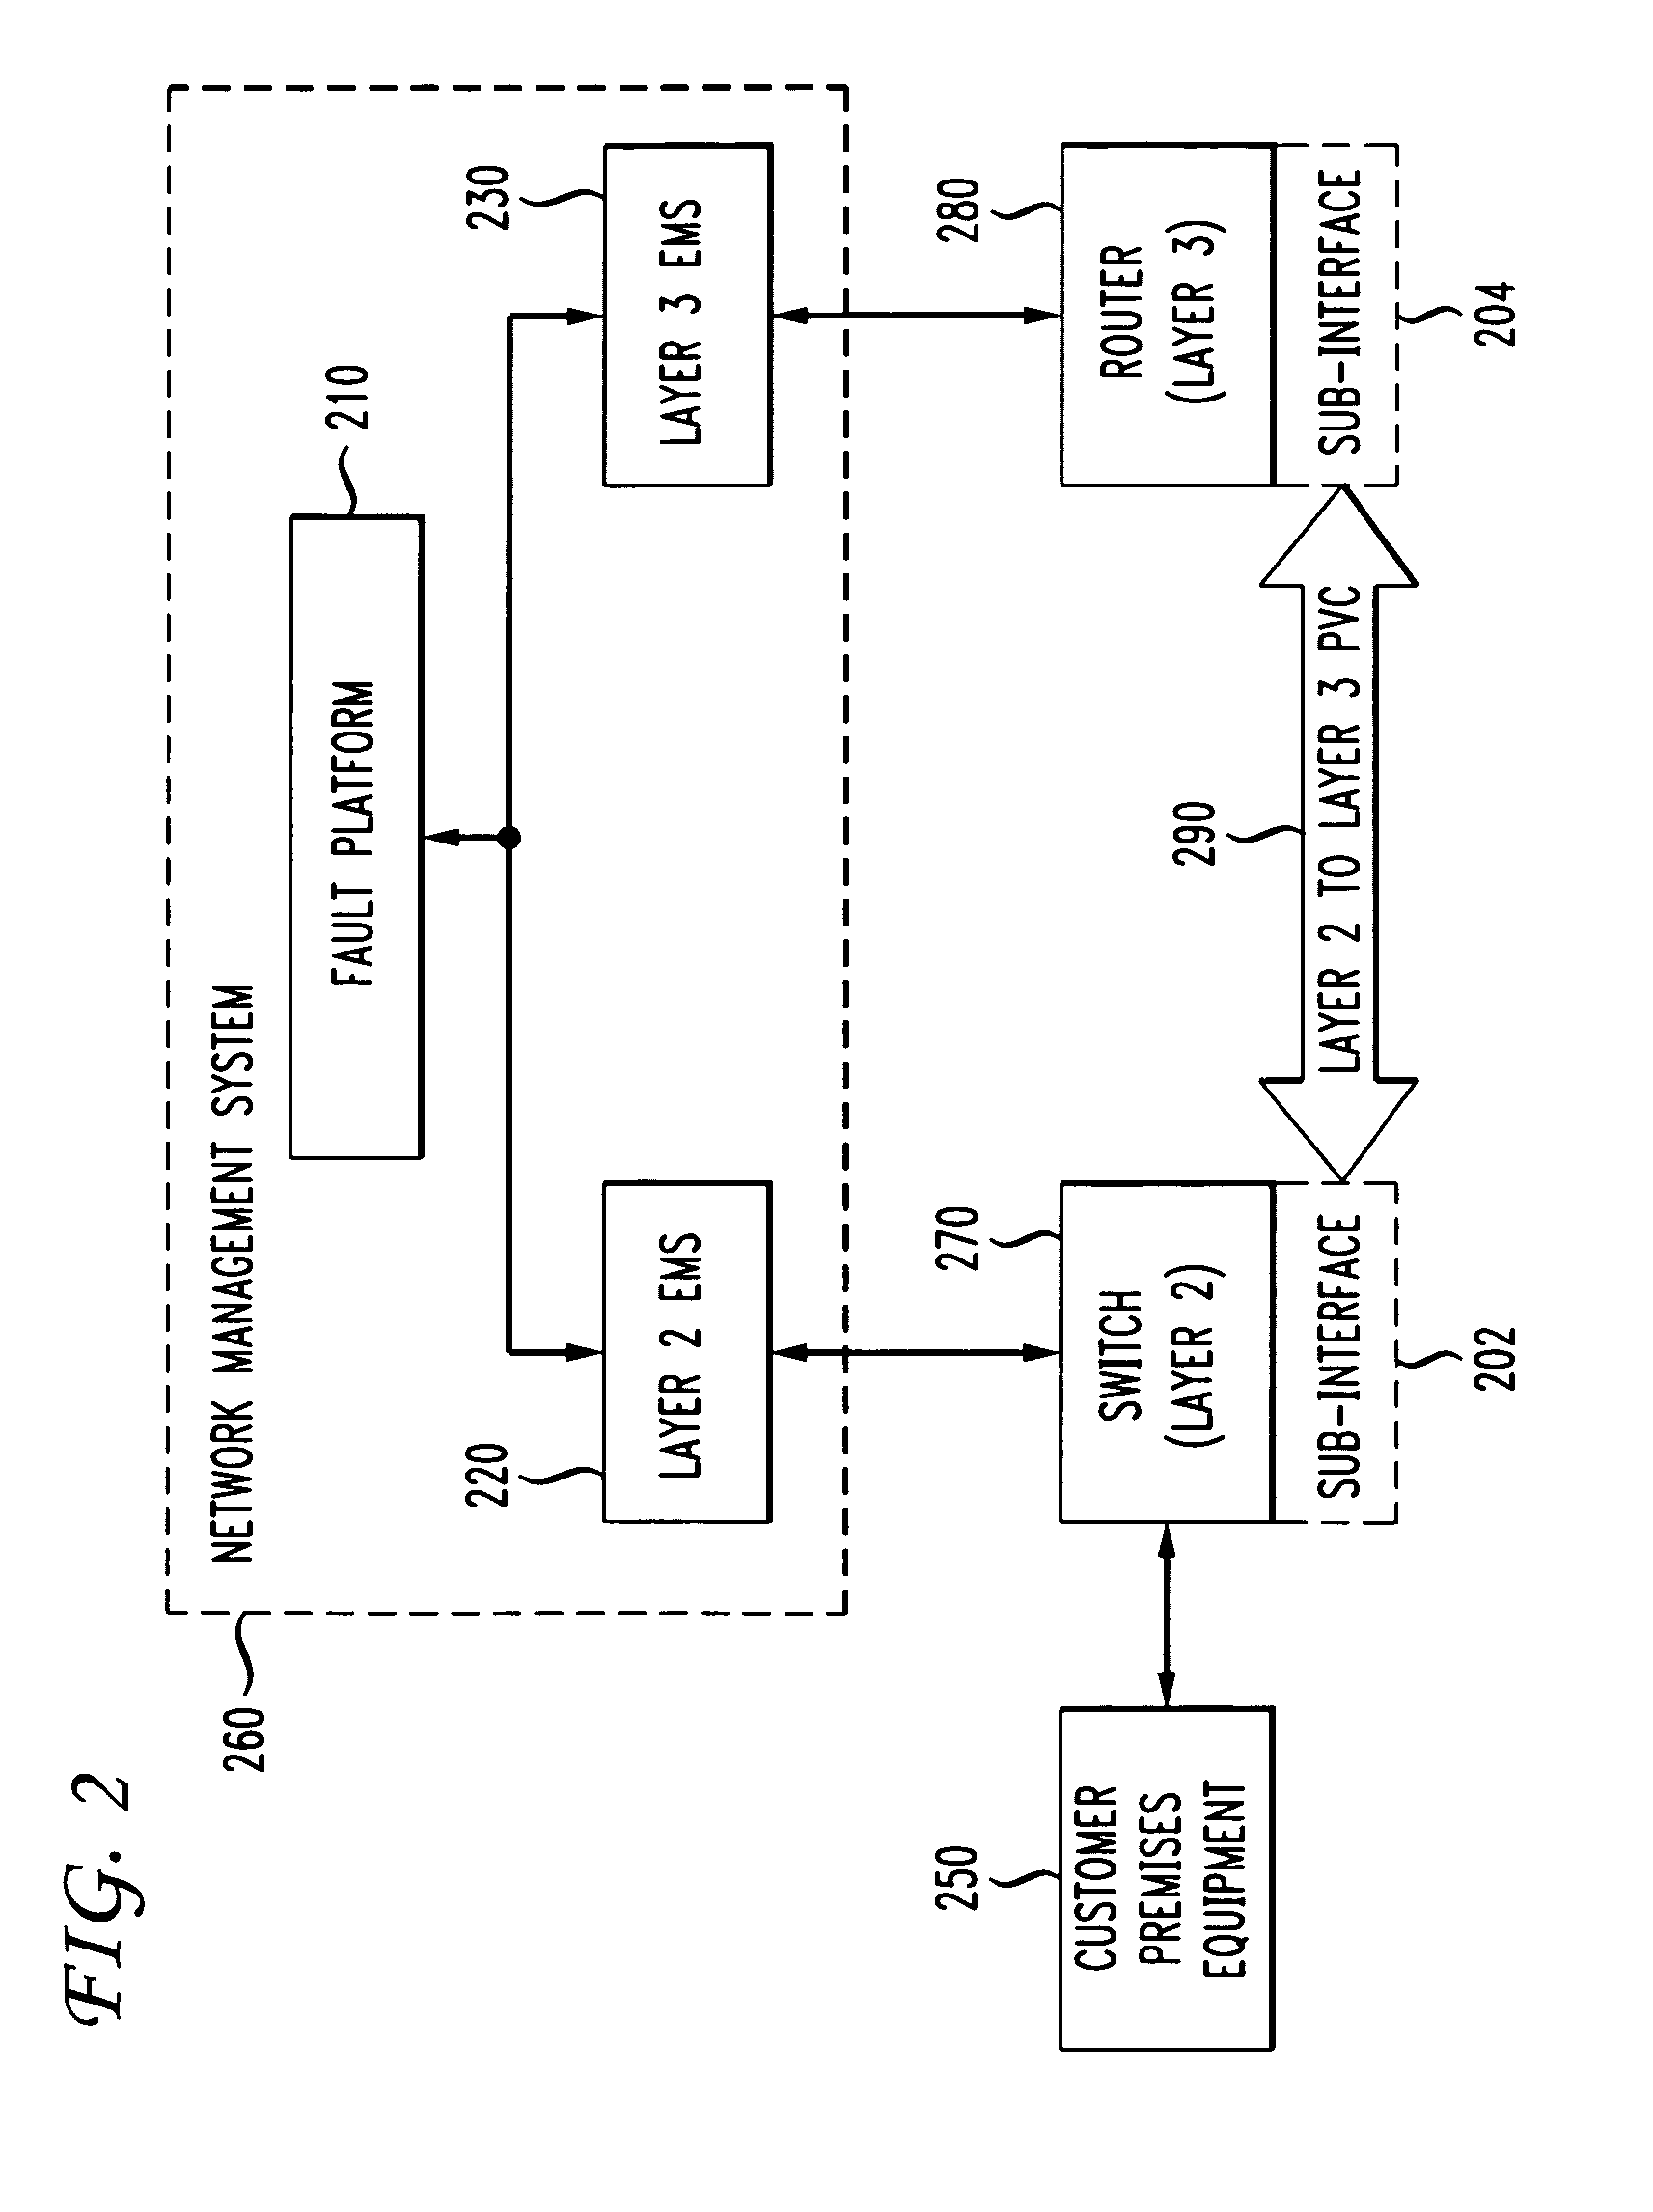 Automatic problem isolation for multi-layer network failures